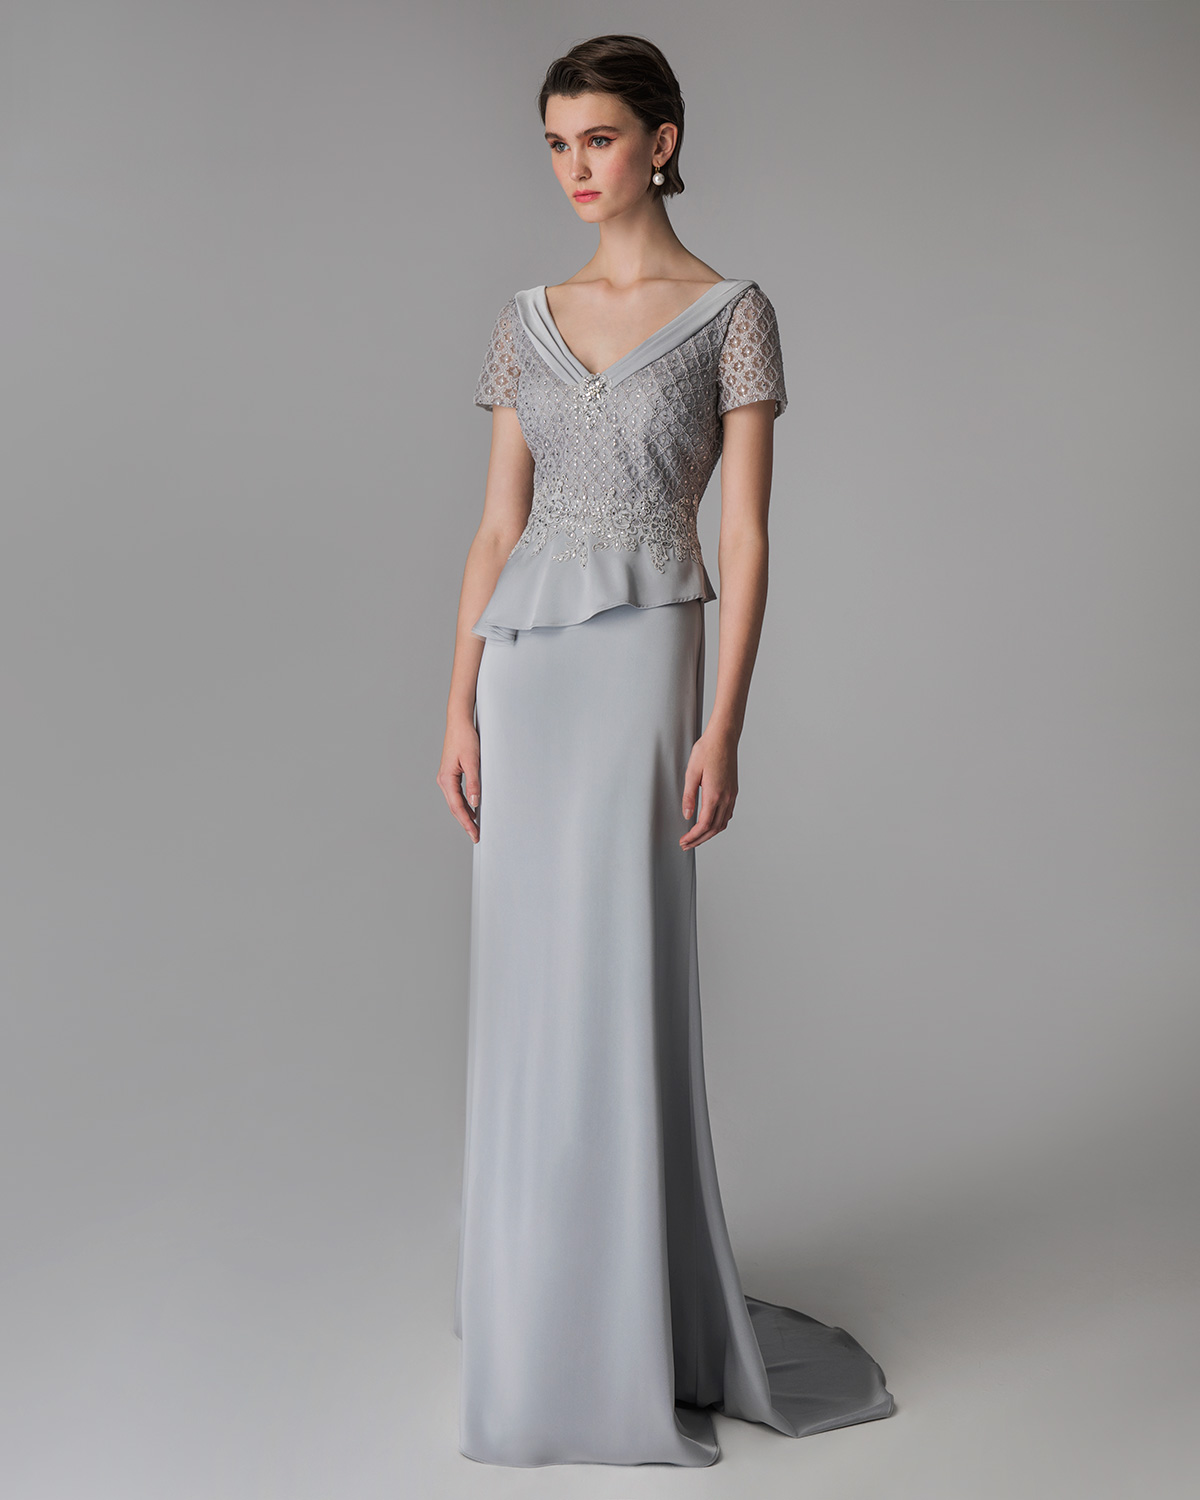 Classic Dresses / Long evening dress with lace top and beading